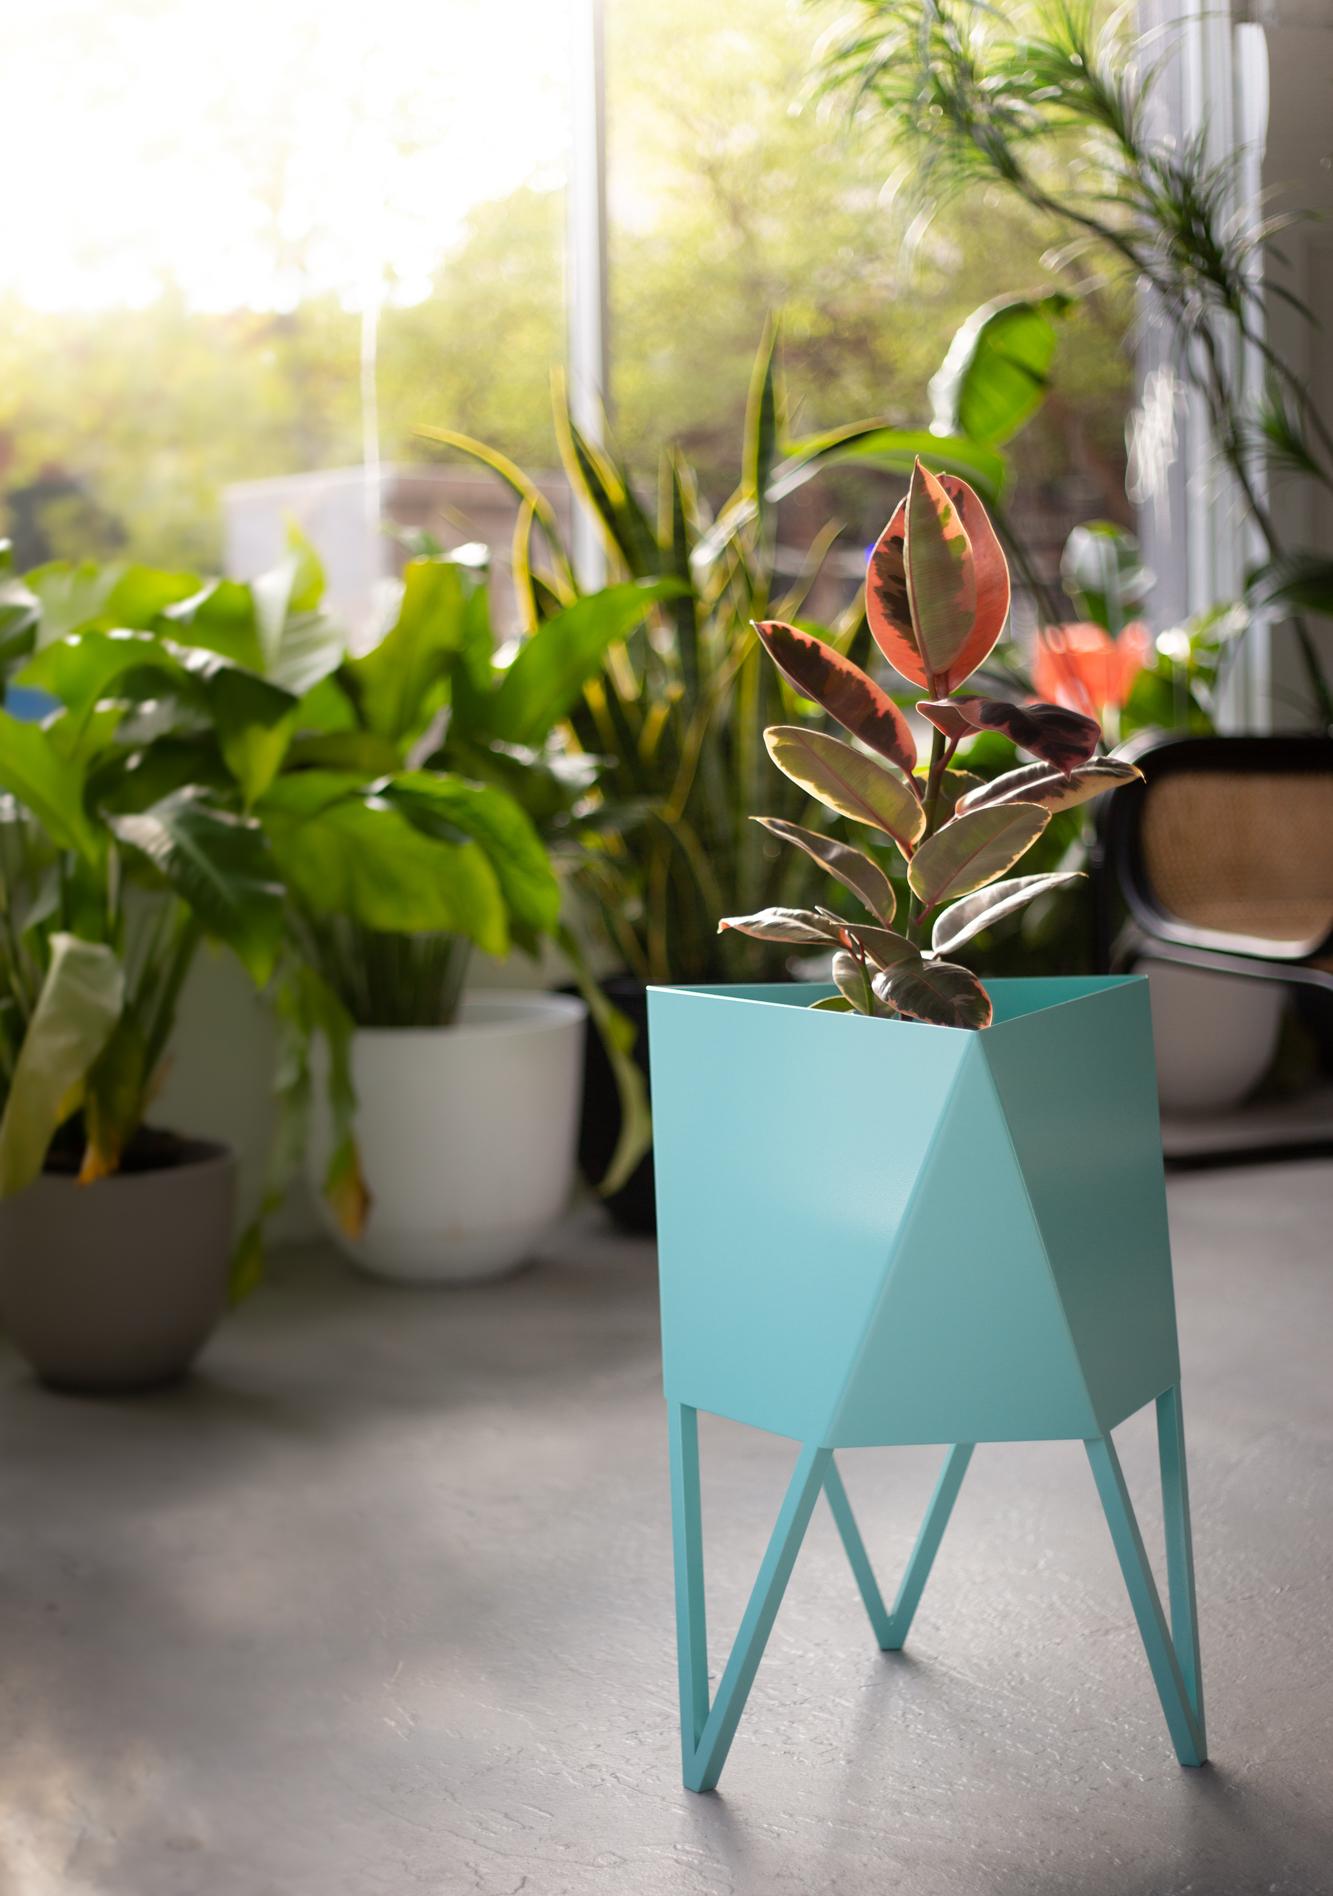 Force/Collide's award-winning signature planter is an ongoing production available in multiple colors and sizes. This original design is a nod to playful perspectives and spatial relationships. Proportions are thoughtful in aesthetic while